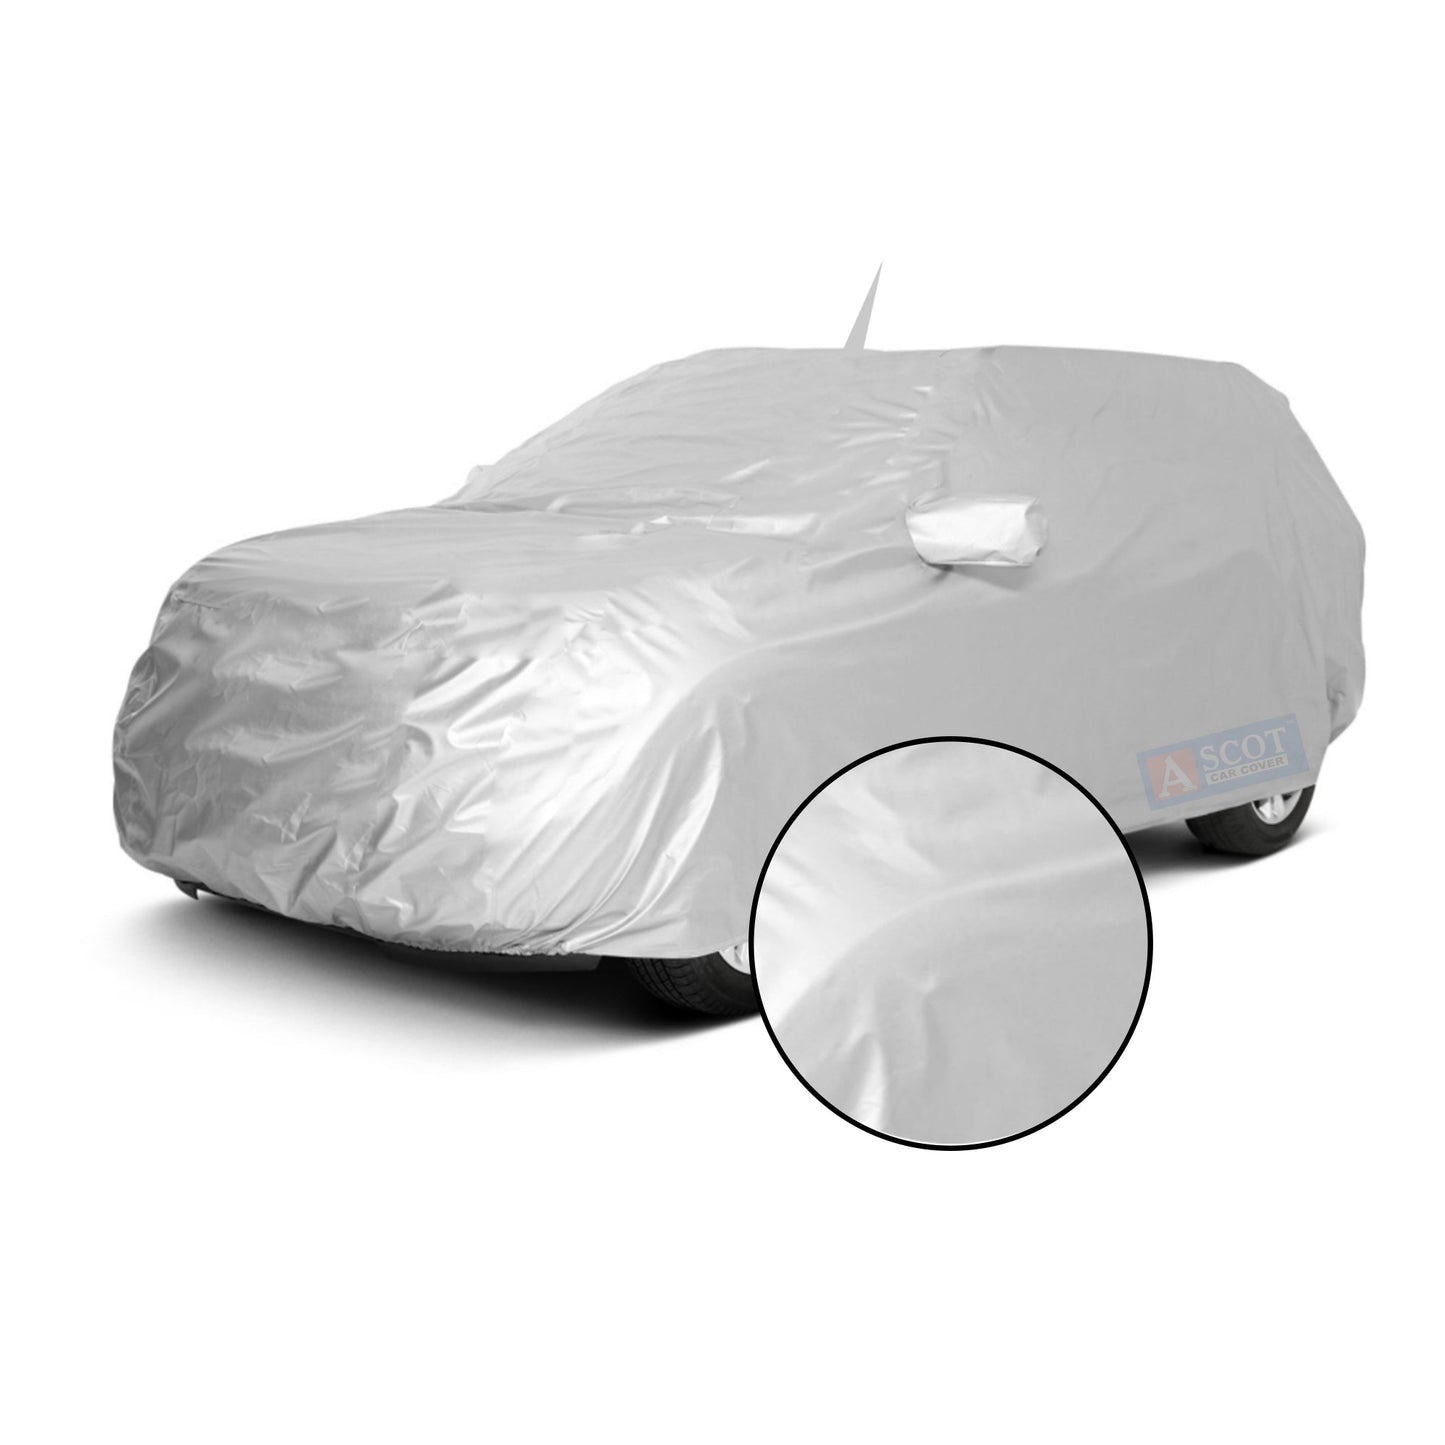 Ascot Hyundai Kona Electric Car Body Cover Dust Proof, Trippel Stitched